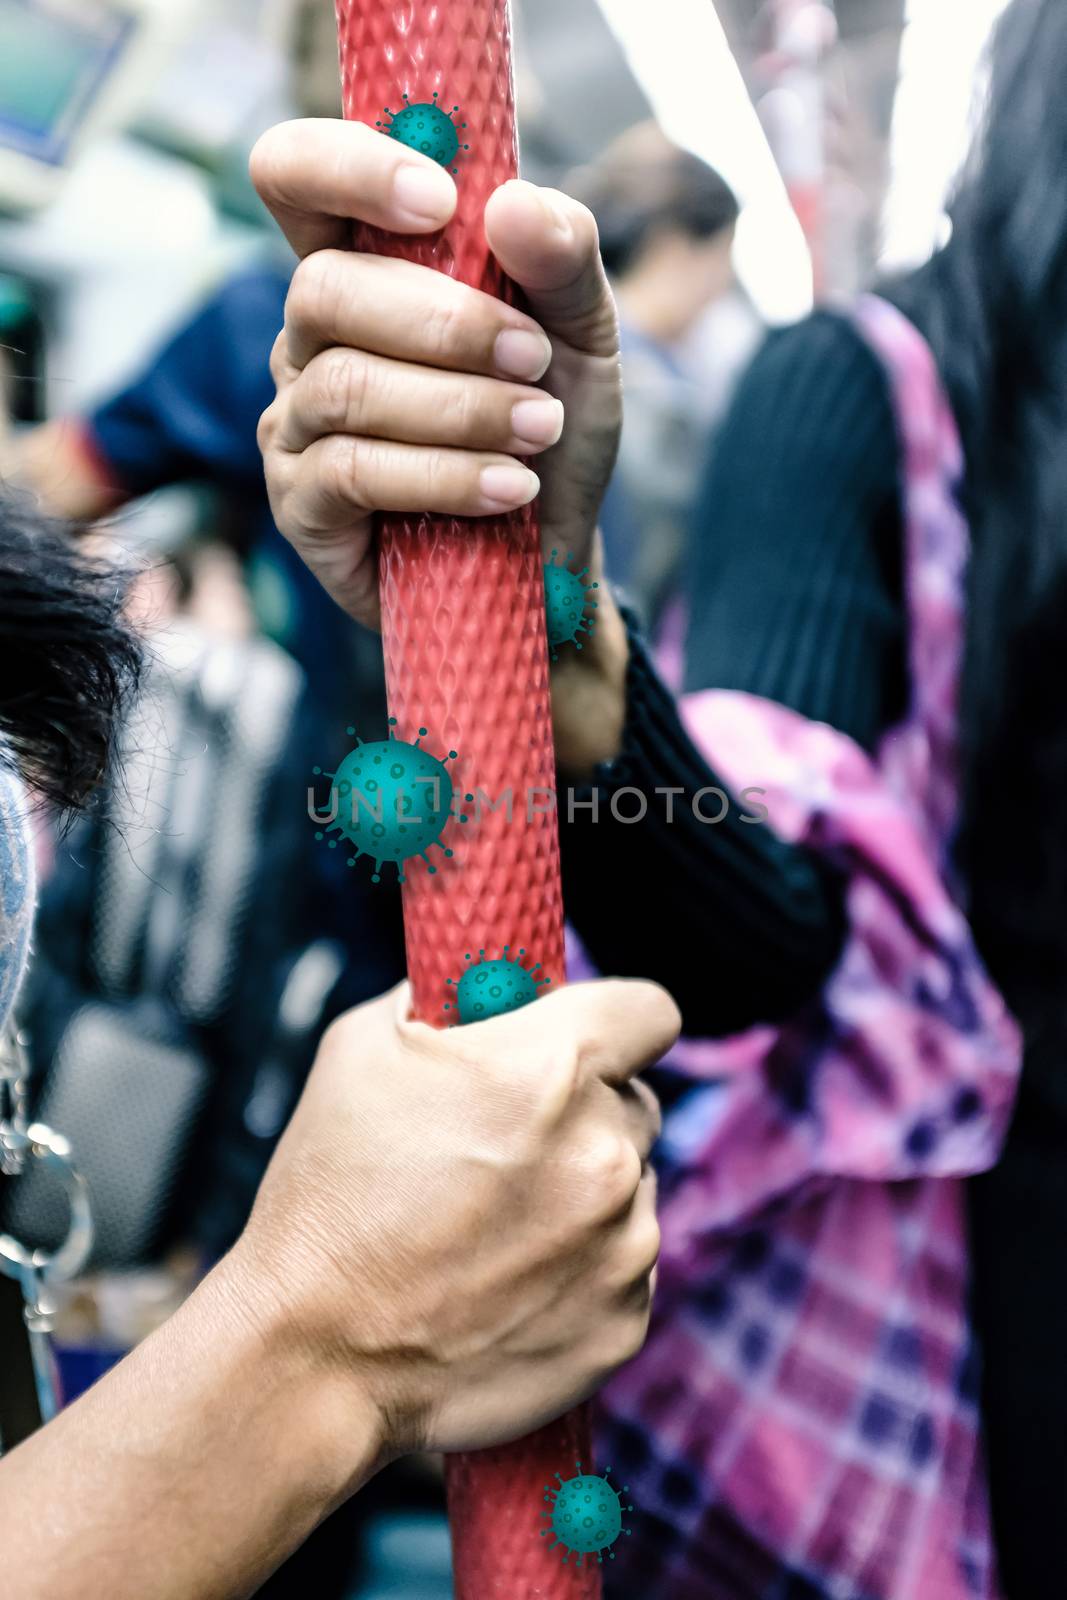 passenger hands holding handle in public transportation like subway, skytrain and bus with virus or germ effect during COVID-19 situation, concept of preventing pandemic spread, shallow depth of field